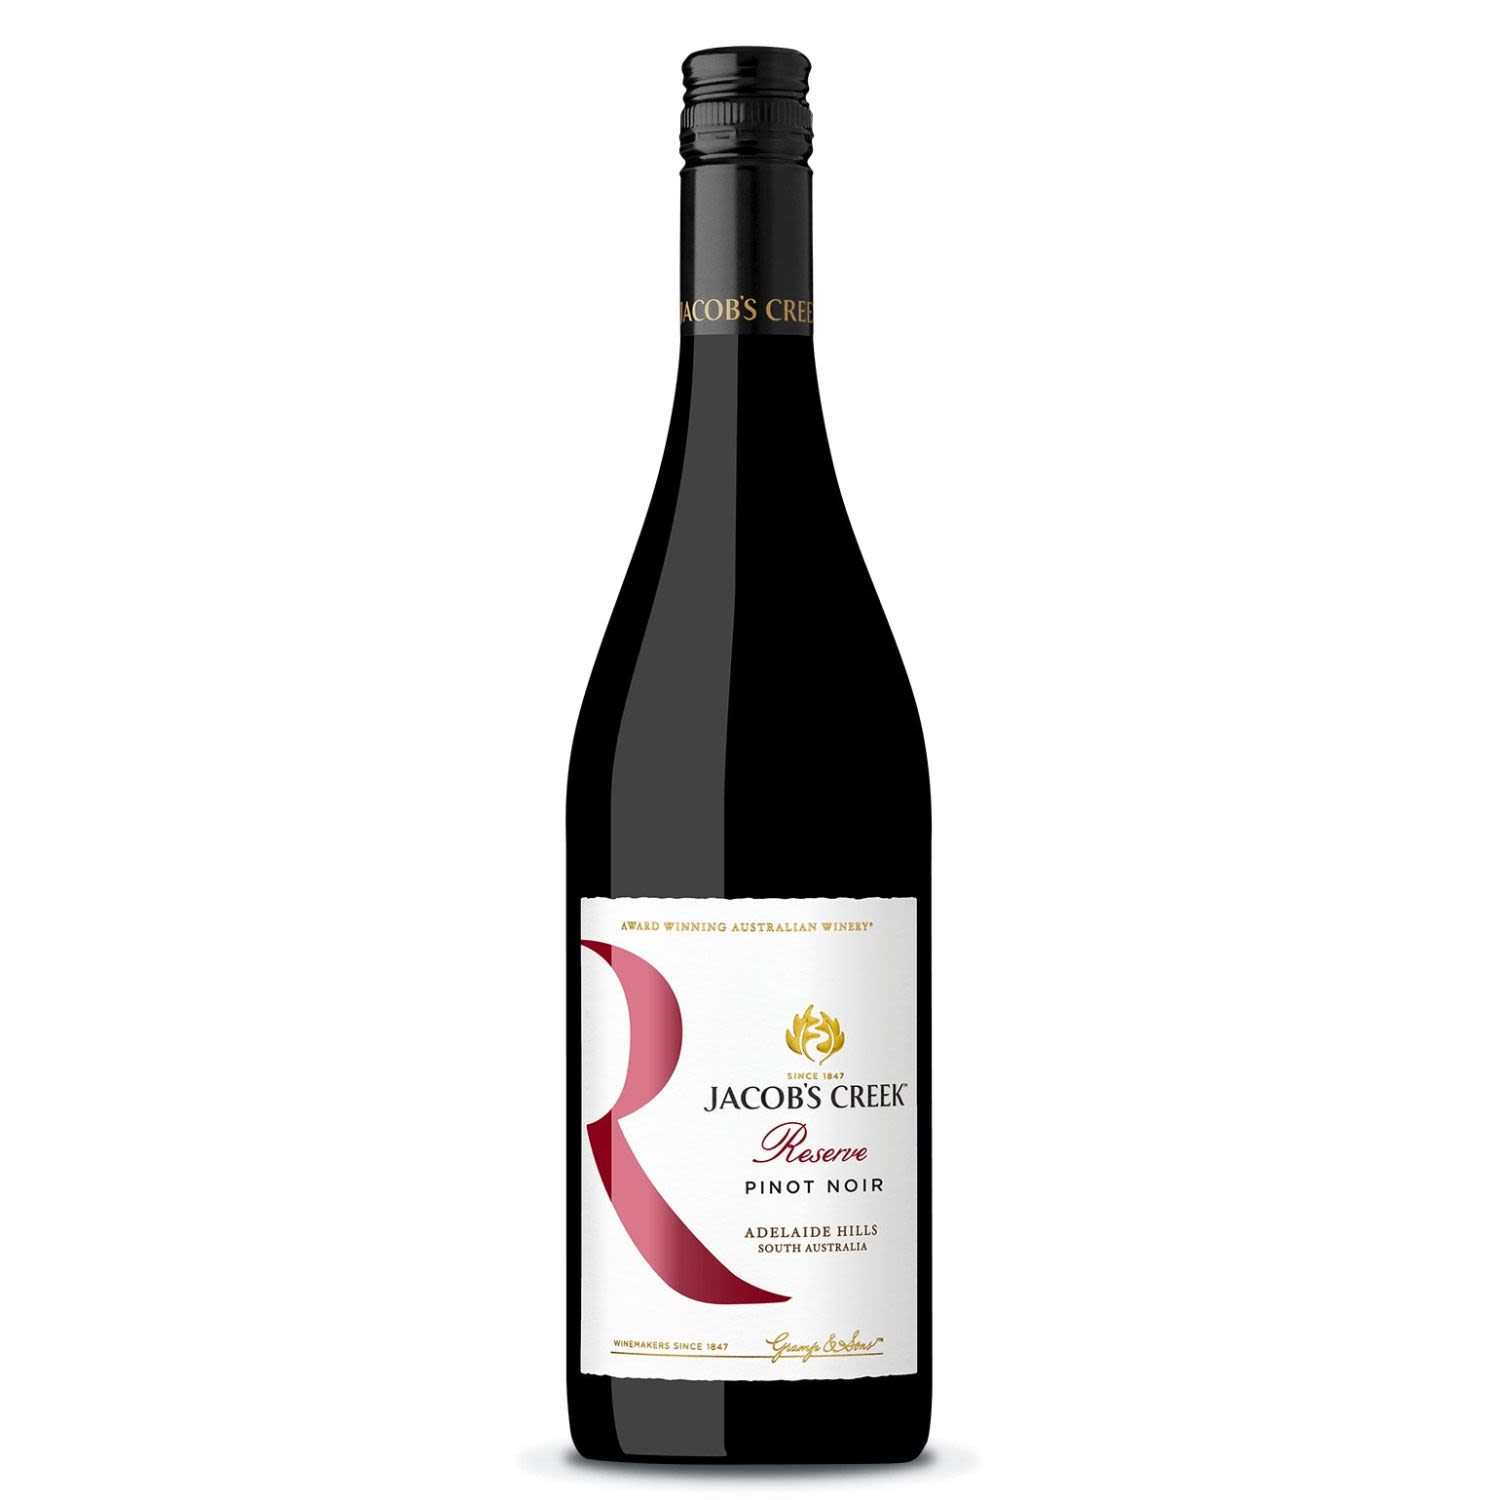 The nose is complex yet harmonious, showing strawberry, charry oak balanced with truffle and earthy notes. Intense strawberry and cherry flavours are complemented by soft tannins and a lovely savoury finish.  *Vintages may vary<br /> <br />Alcohol Volume: 14.00%<br /><br />Pack Format: Bottle<br /><br />Standard Drinks: 8.3</br /><br />Pack Type: Bottle<br /><br />Country of Origin: Australia<br /><br />Region: Adelaide Hills<br /><br />Vintage: Vintages Vary<br />